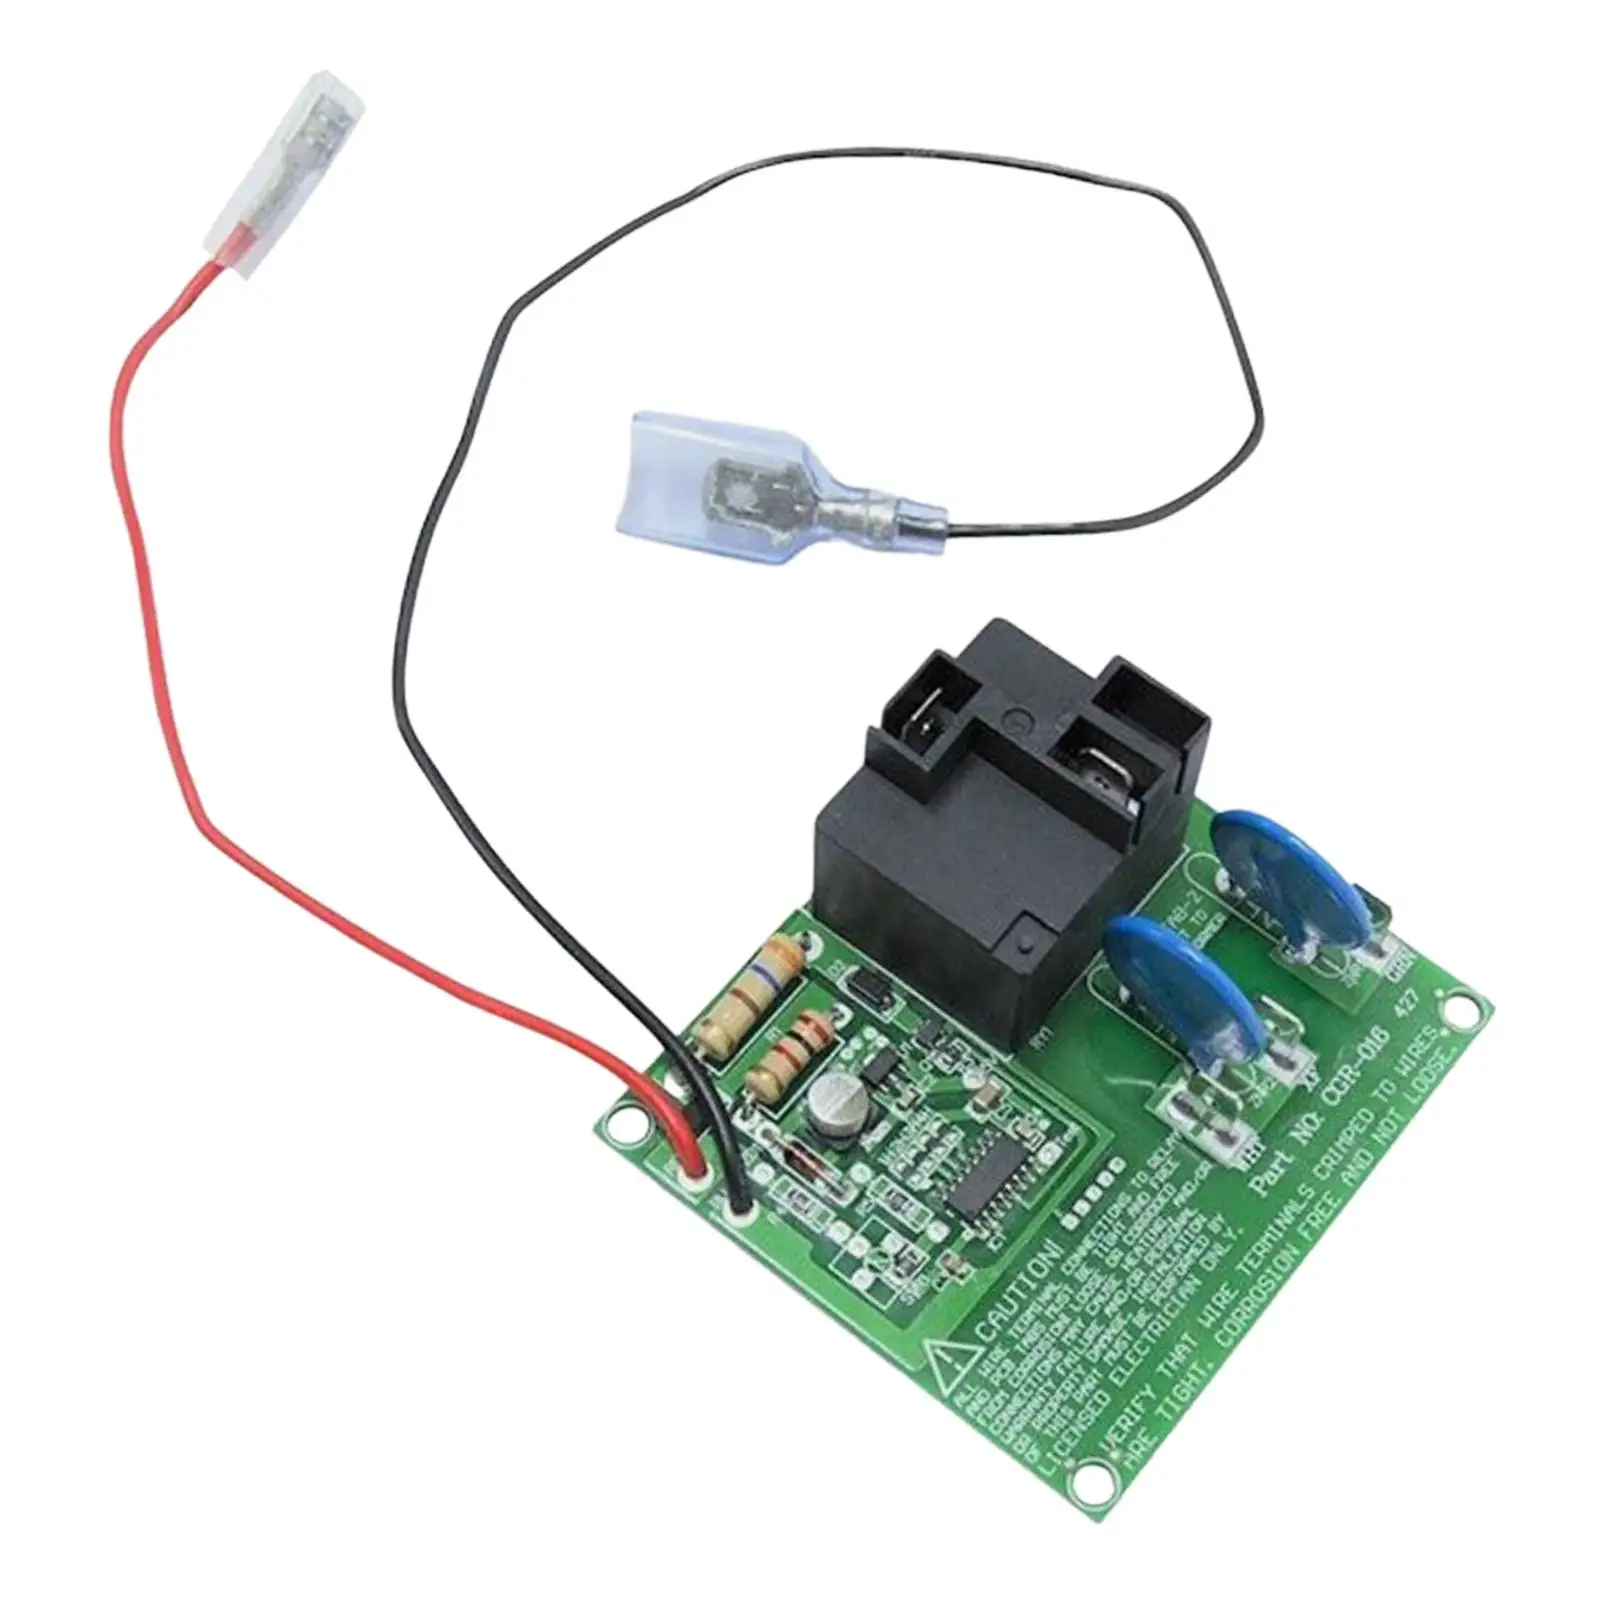 

Charger Circuit Board 36V Generation Power Input Control for Easily Install Vehicle Spare Parts Replacement Professional